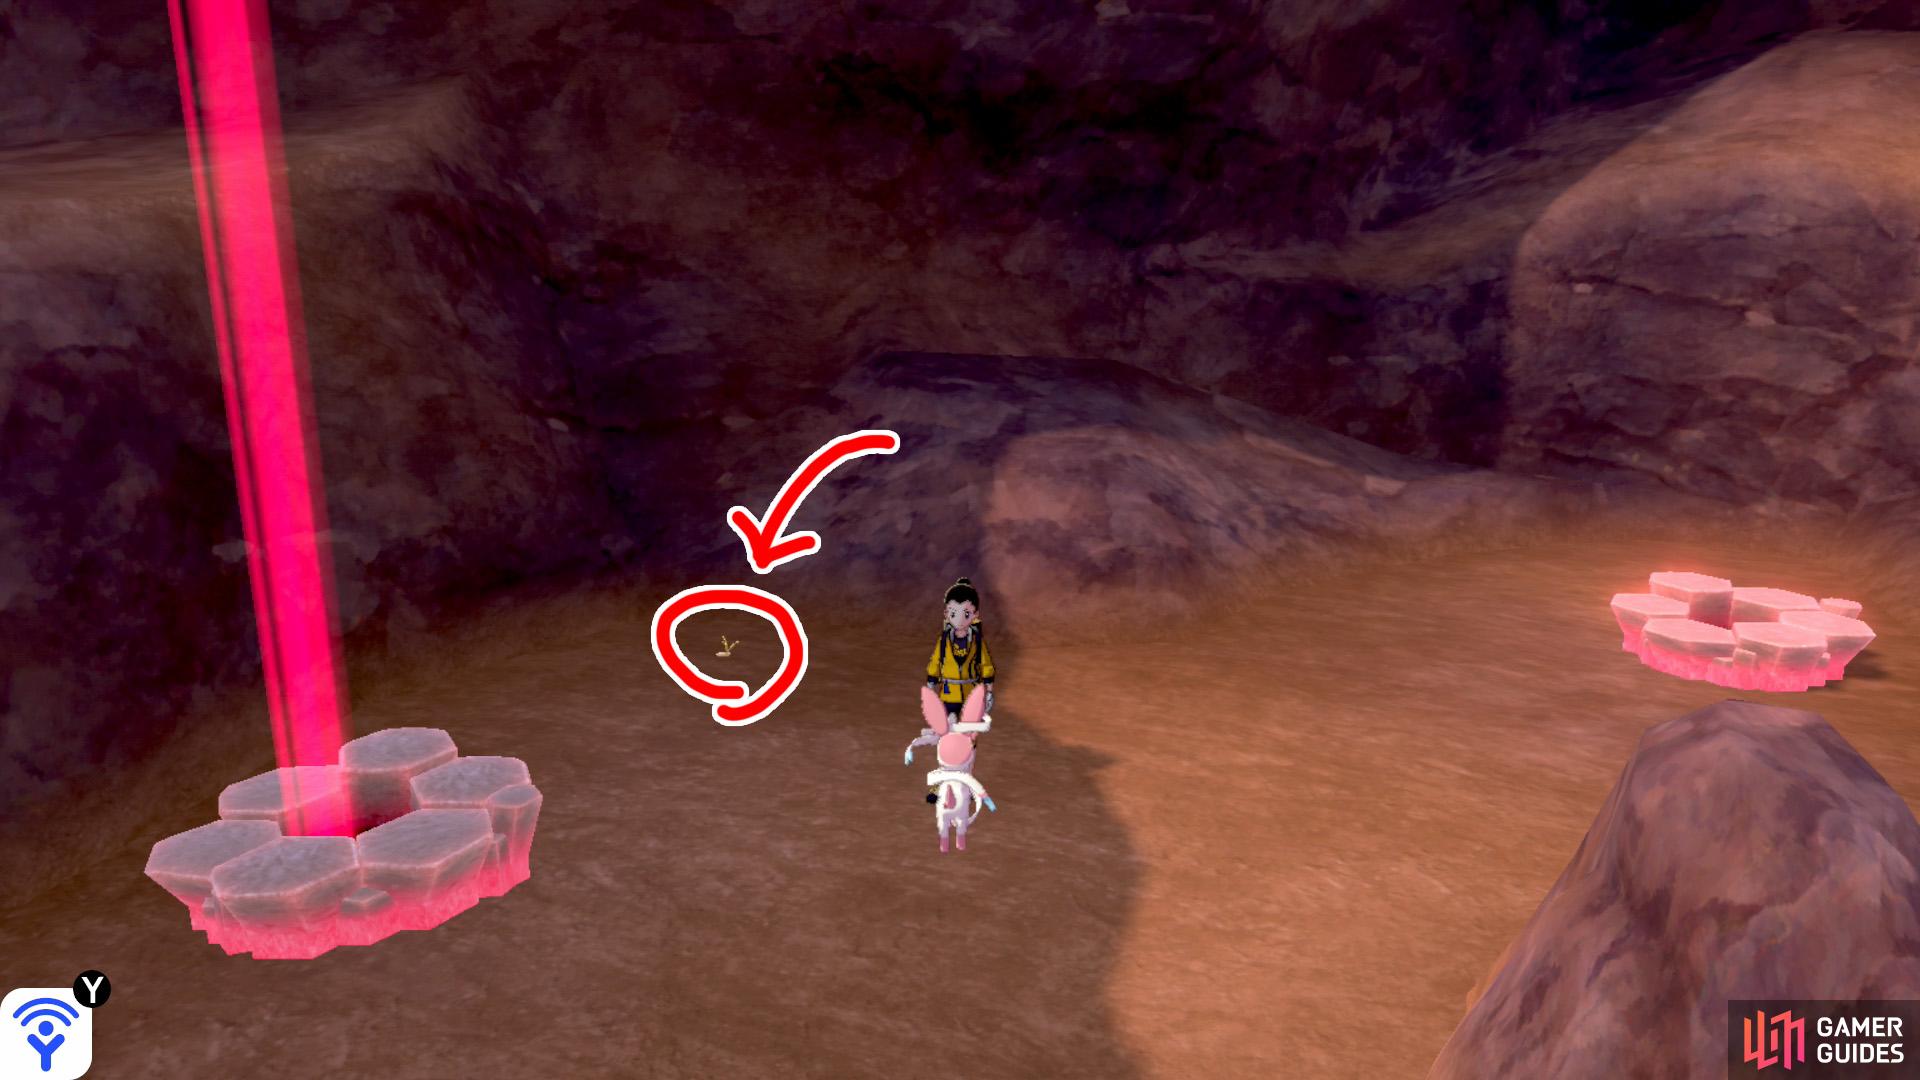 3/7: From Diglett 2, head deeper into this part of the cavern. There will be three Pokémon Den here. Check towards the left for Number 3.